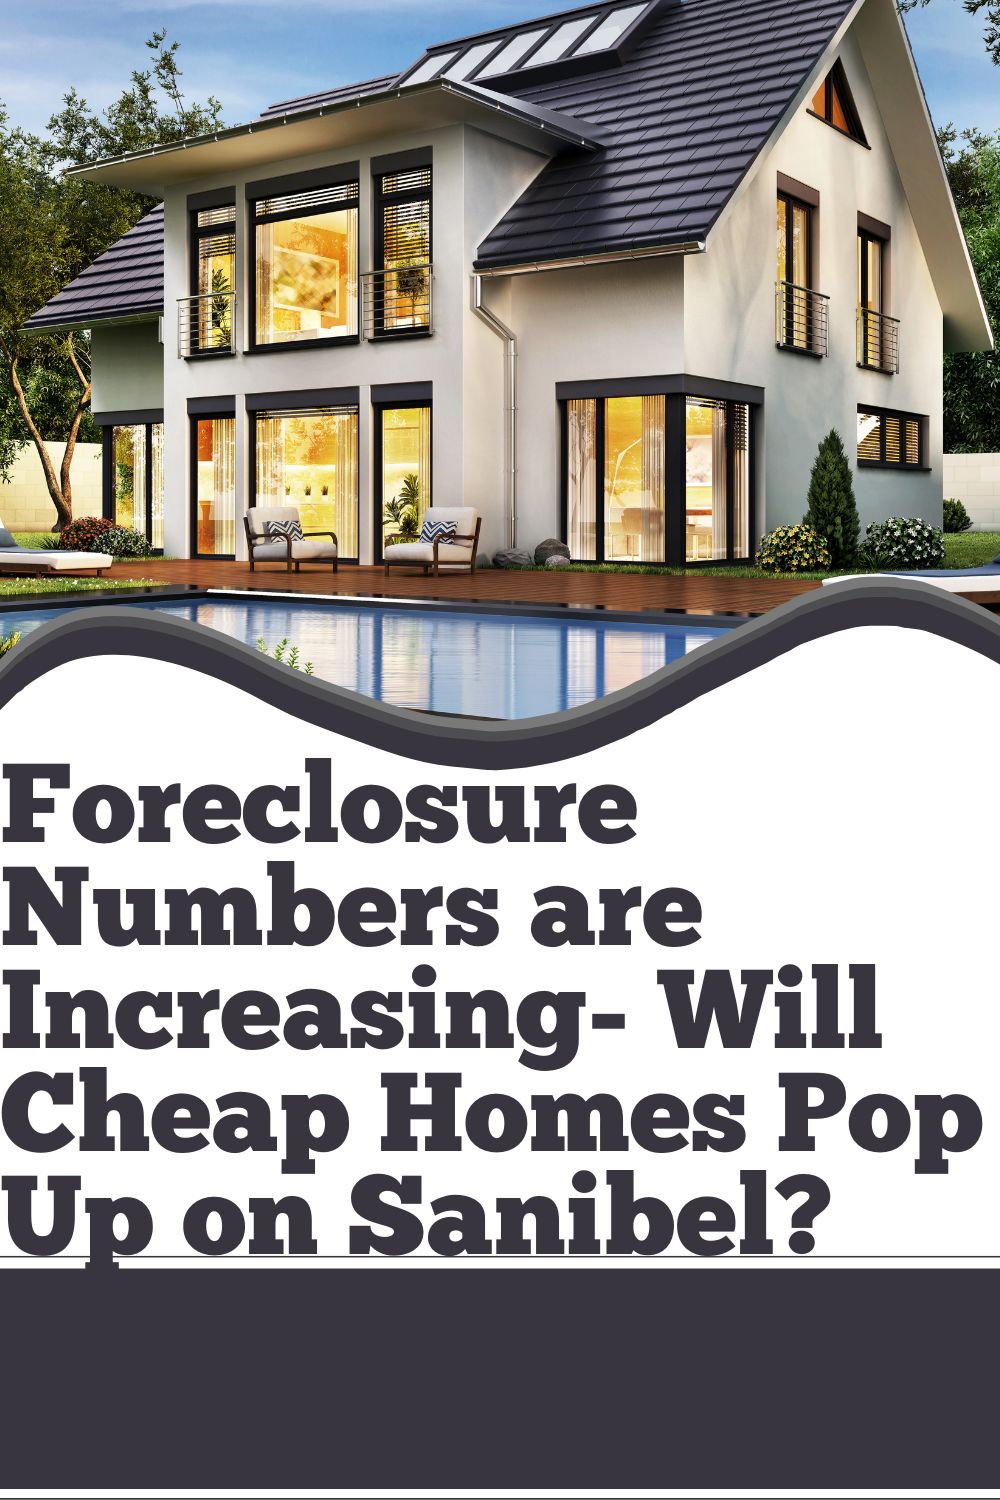 Foreclosure Numbers are Increasing- Will Cheap Homes Pop Up on Sanibel?